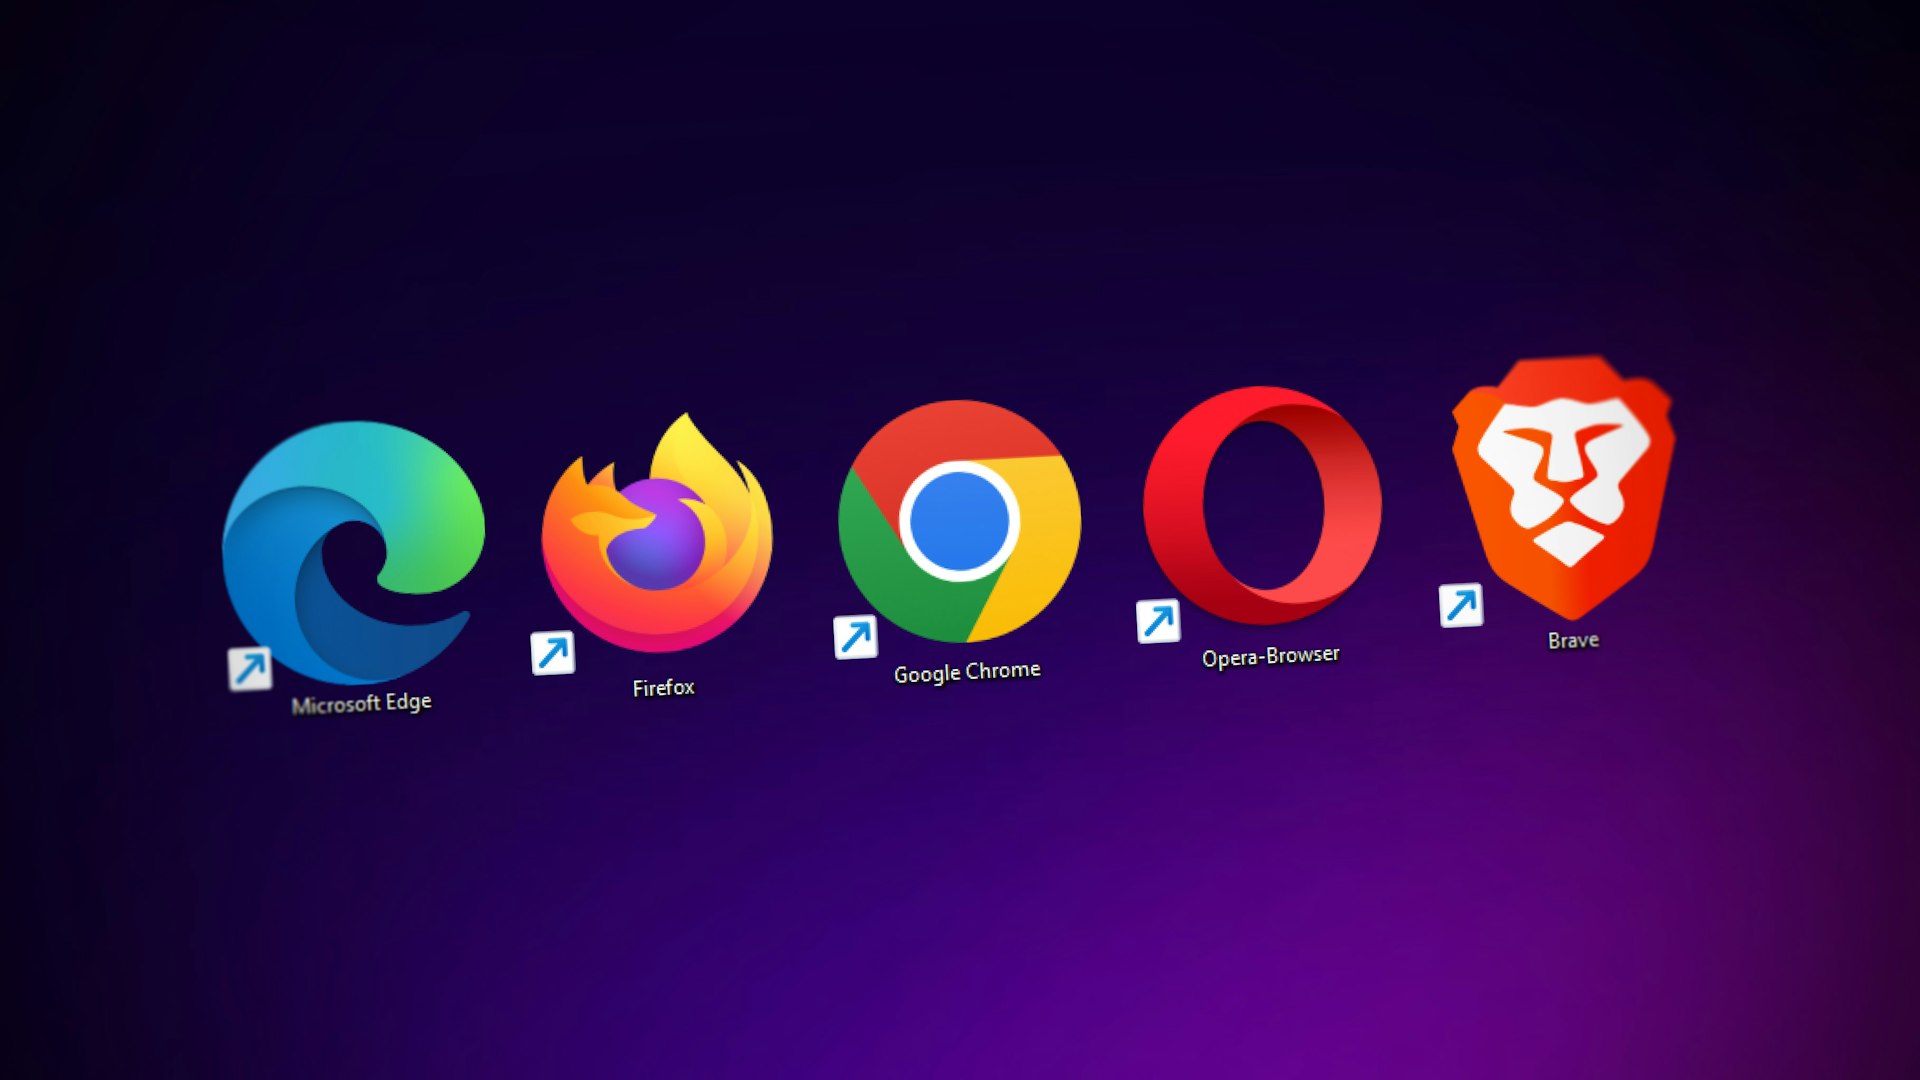 Logos for many different browsers, like Chrome and Brave.